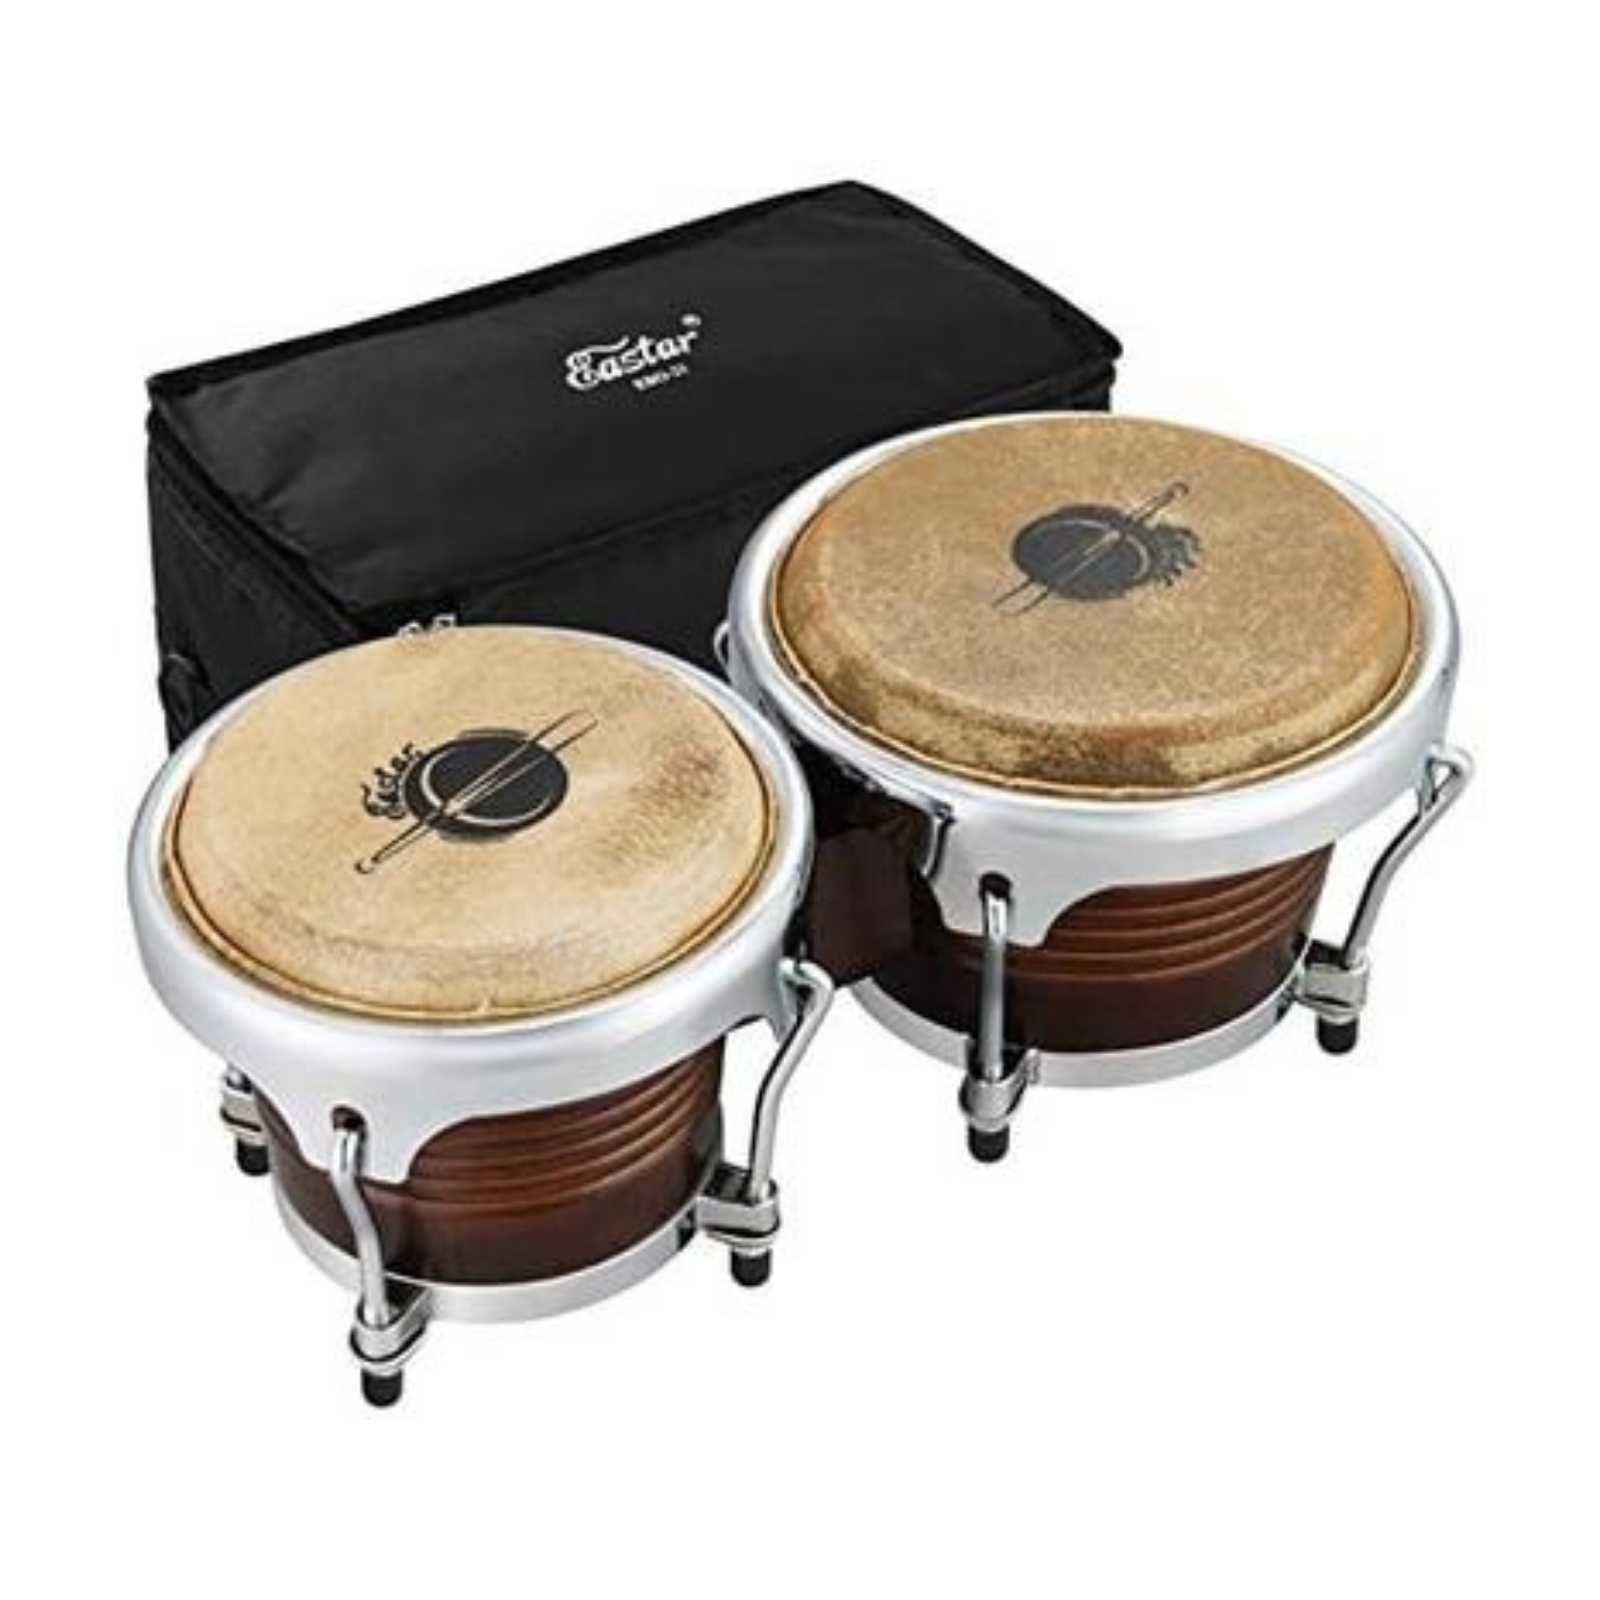 

Eastar EBO-21 7 Inch and 8 Inch Bongo Drums for Beginners with Carrying case/Professional Special Antique Finish